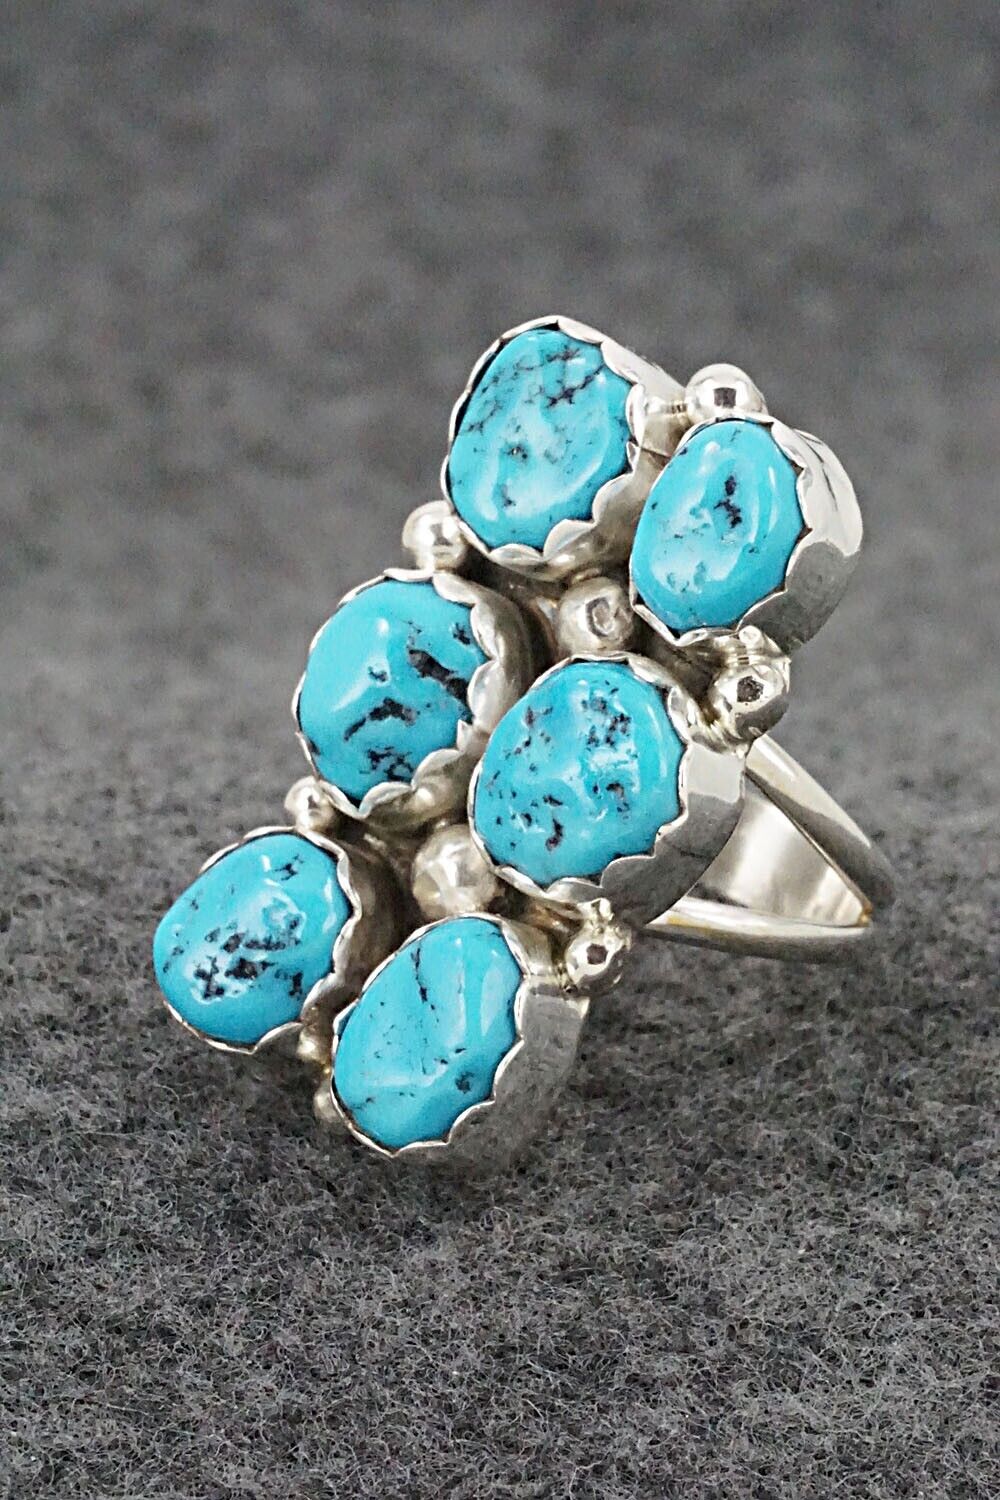 Turquoise & Sterling Silver Ring - Pearlene Spencer - Size 8.5